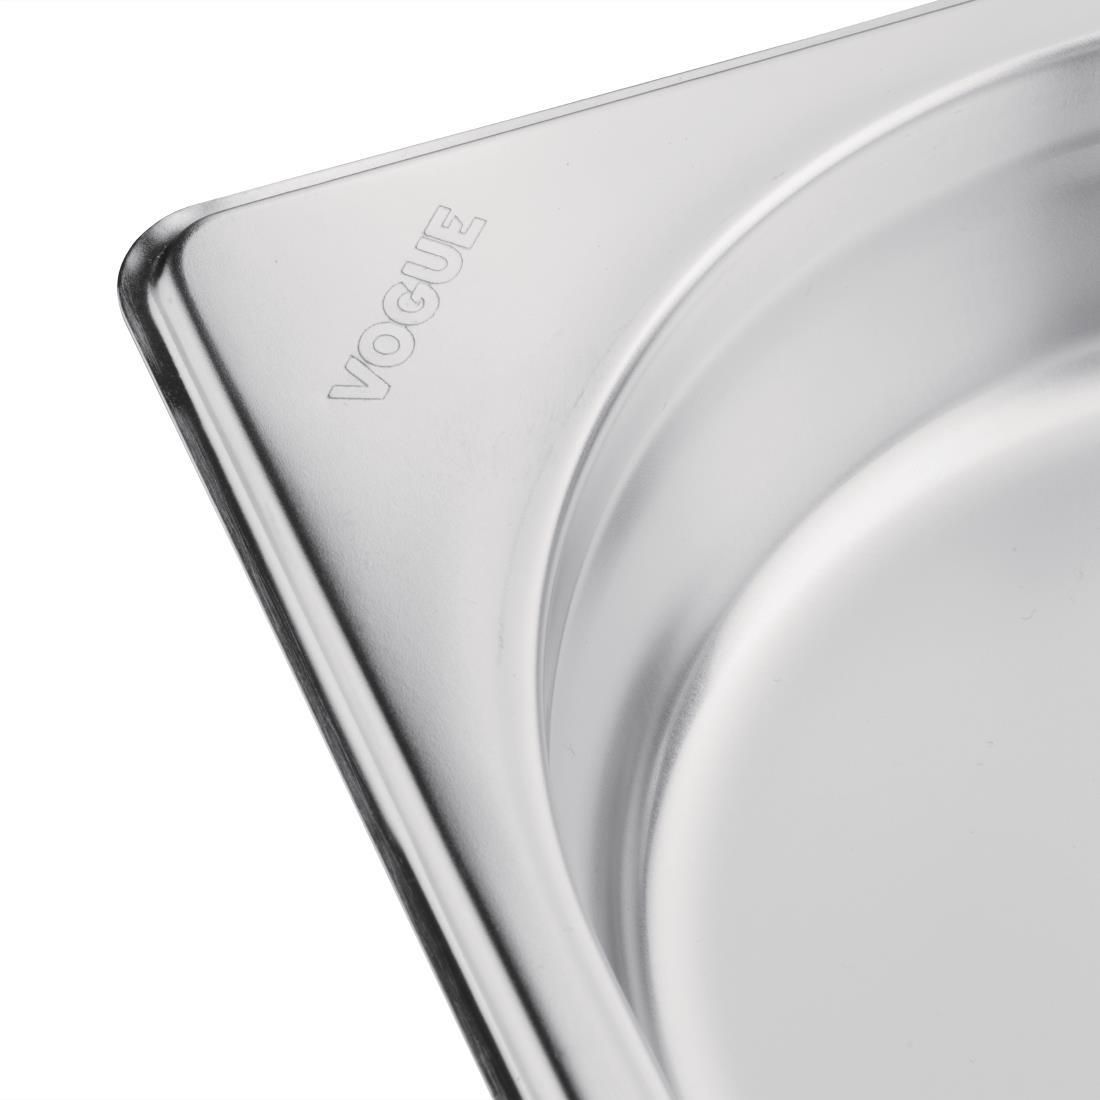 Vogue Stainless Steel 1/1 Gastronorm Pan 20mm - K998  - 5